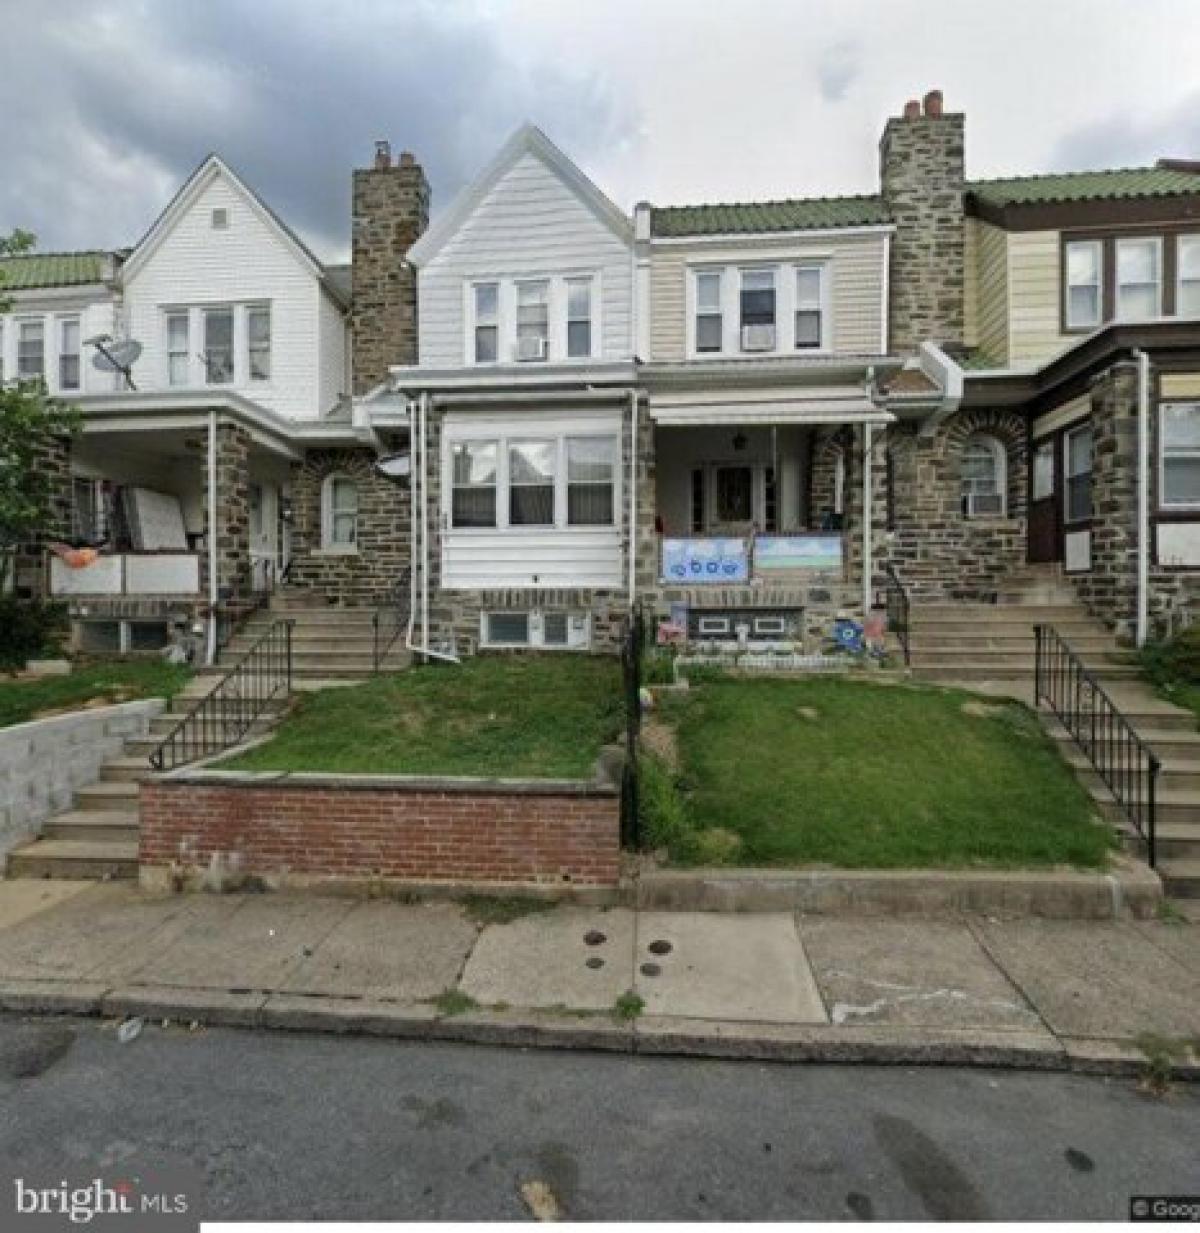 Picture of Home For Sale in Upper Darby, Pennsylvania, United States